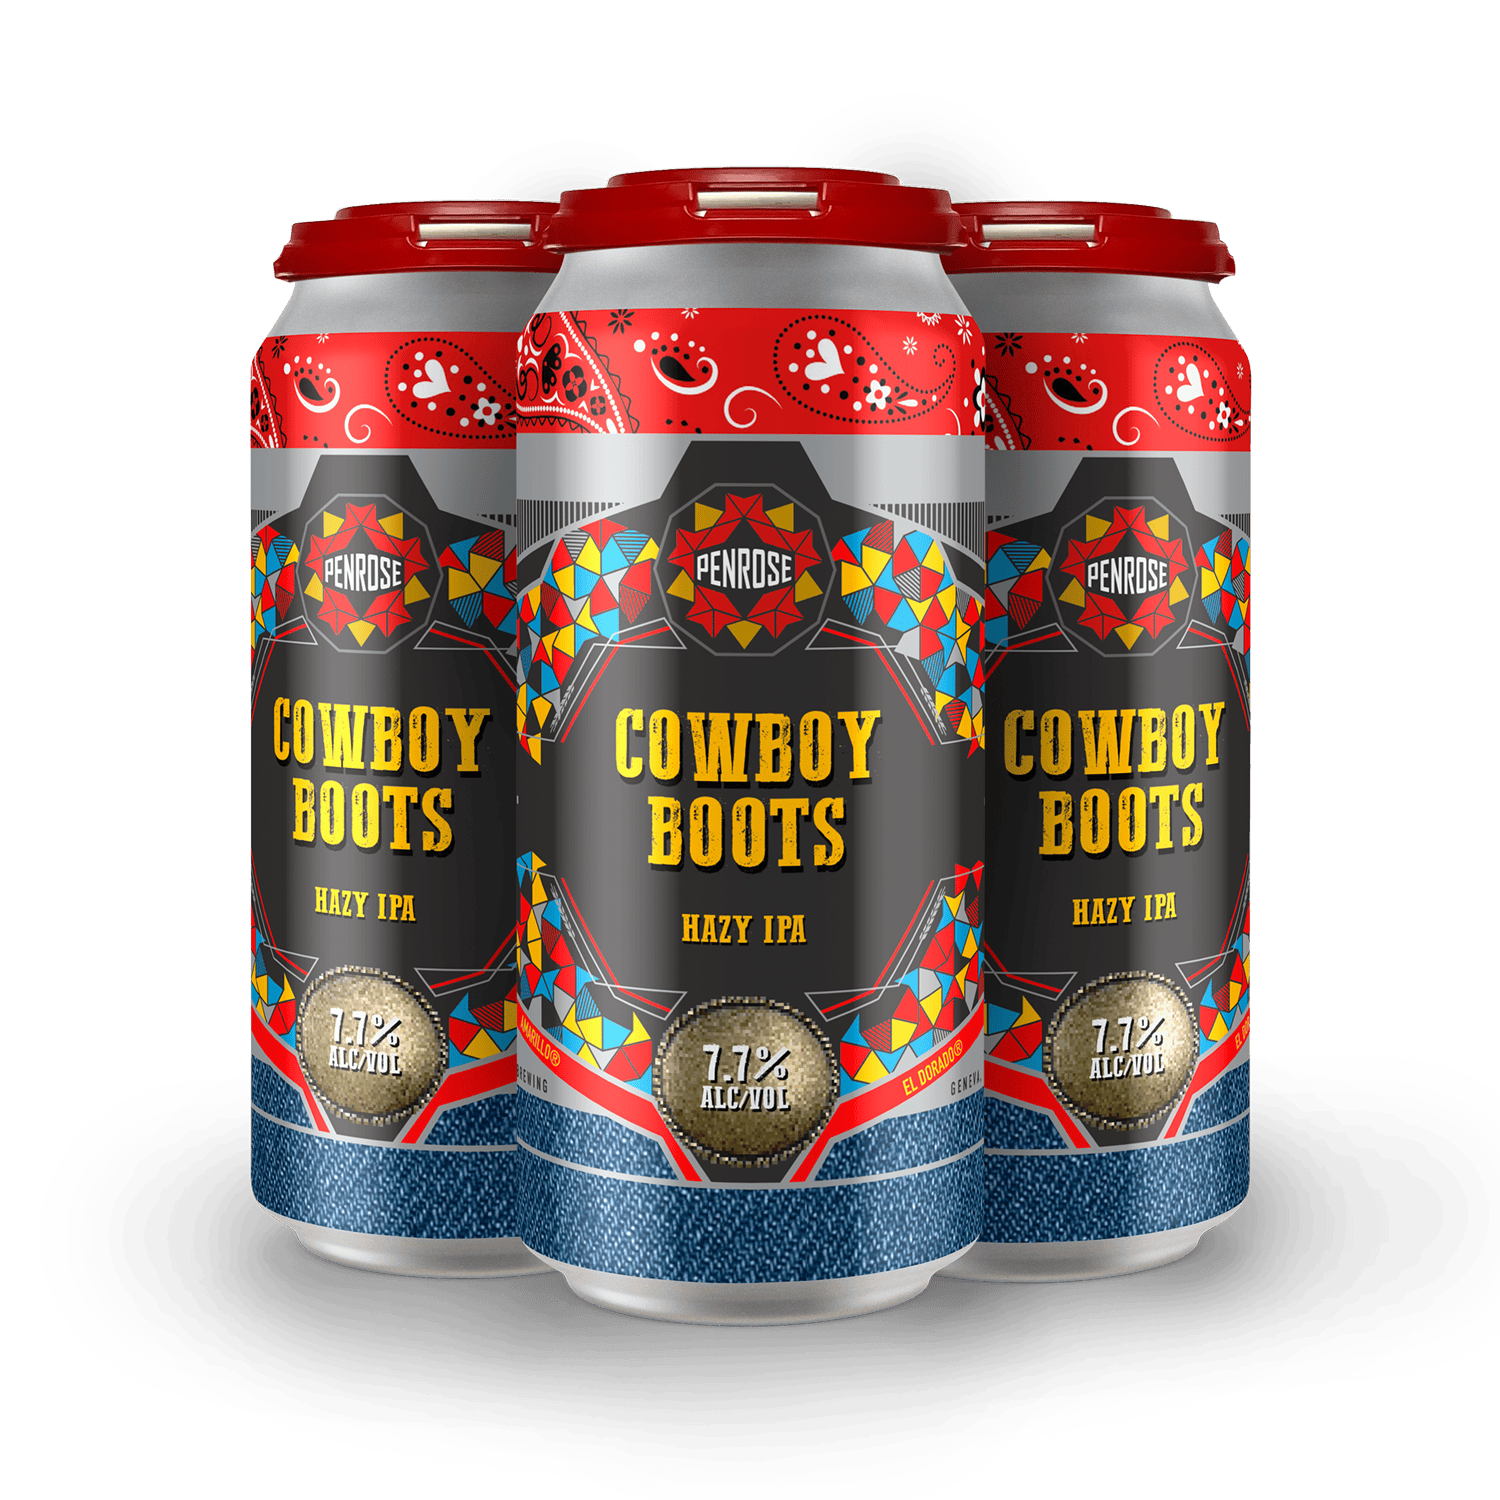 Cowboy Boots is a vibrant, juiced up Hazy IPA, lassoing your taste buds with citrus flavors and a hint of tropical hop character from Amarillo and El Dorado hops. Saddle up for a smooth, juicy ride with this bold brew, perfect for any trailblazing hop lover.